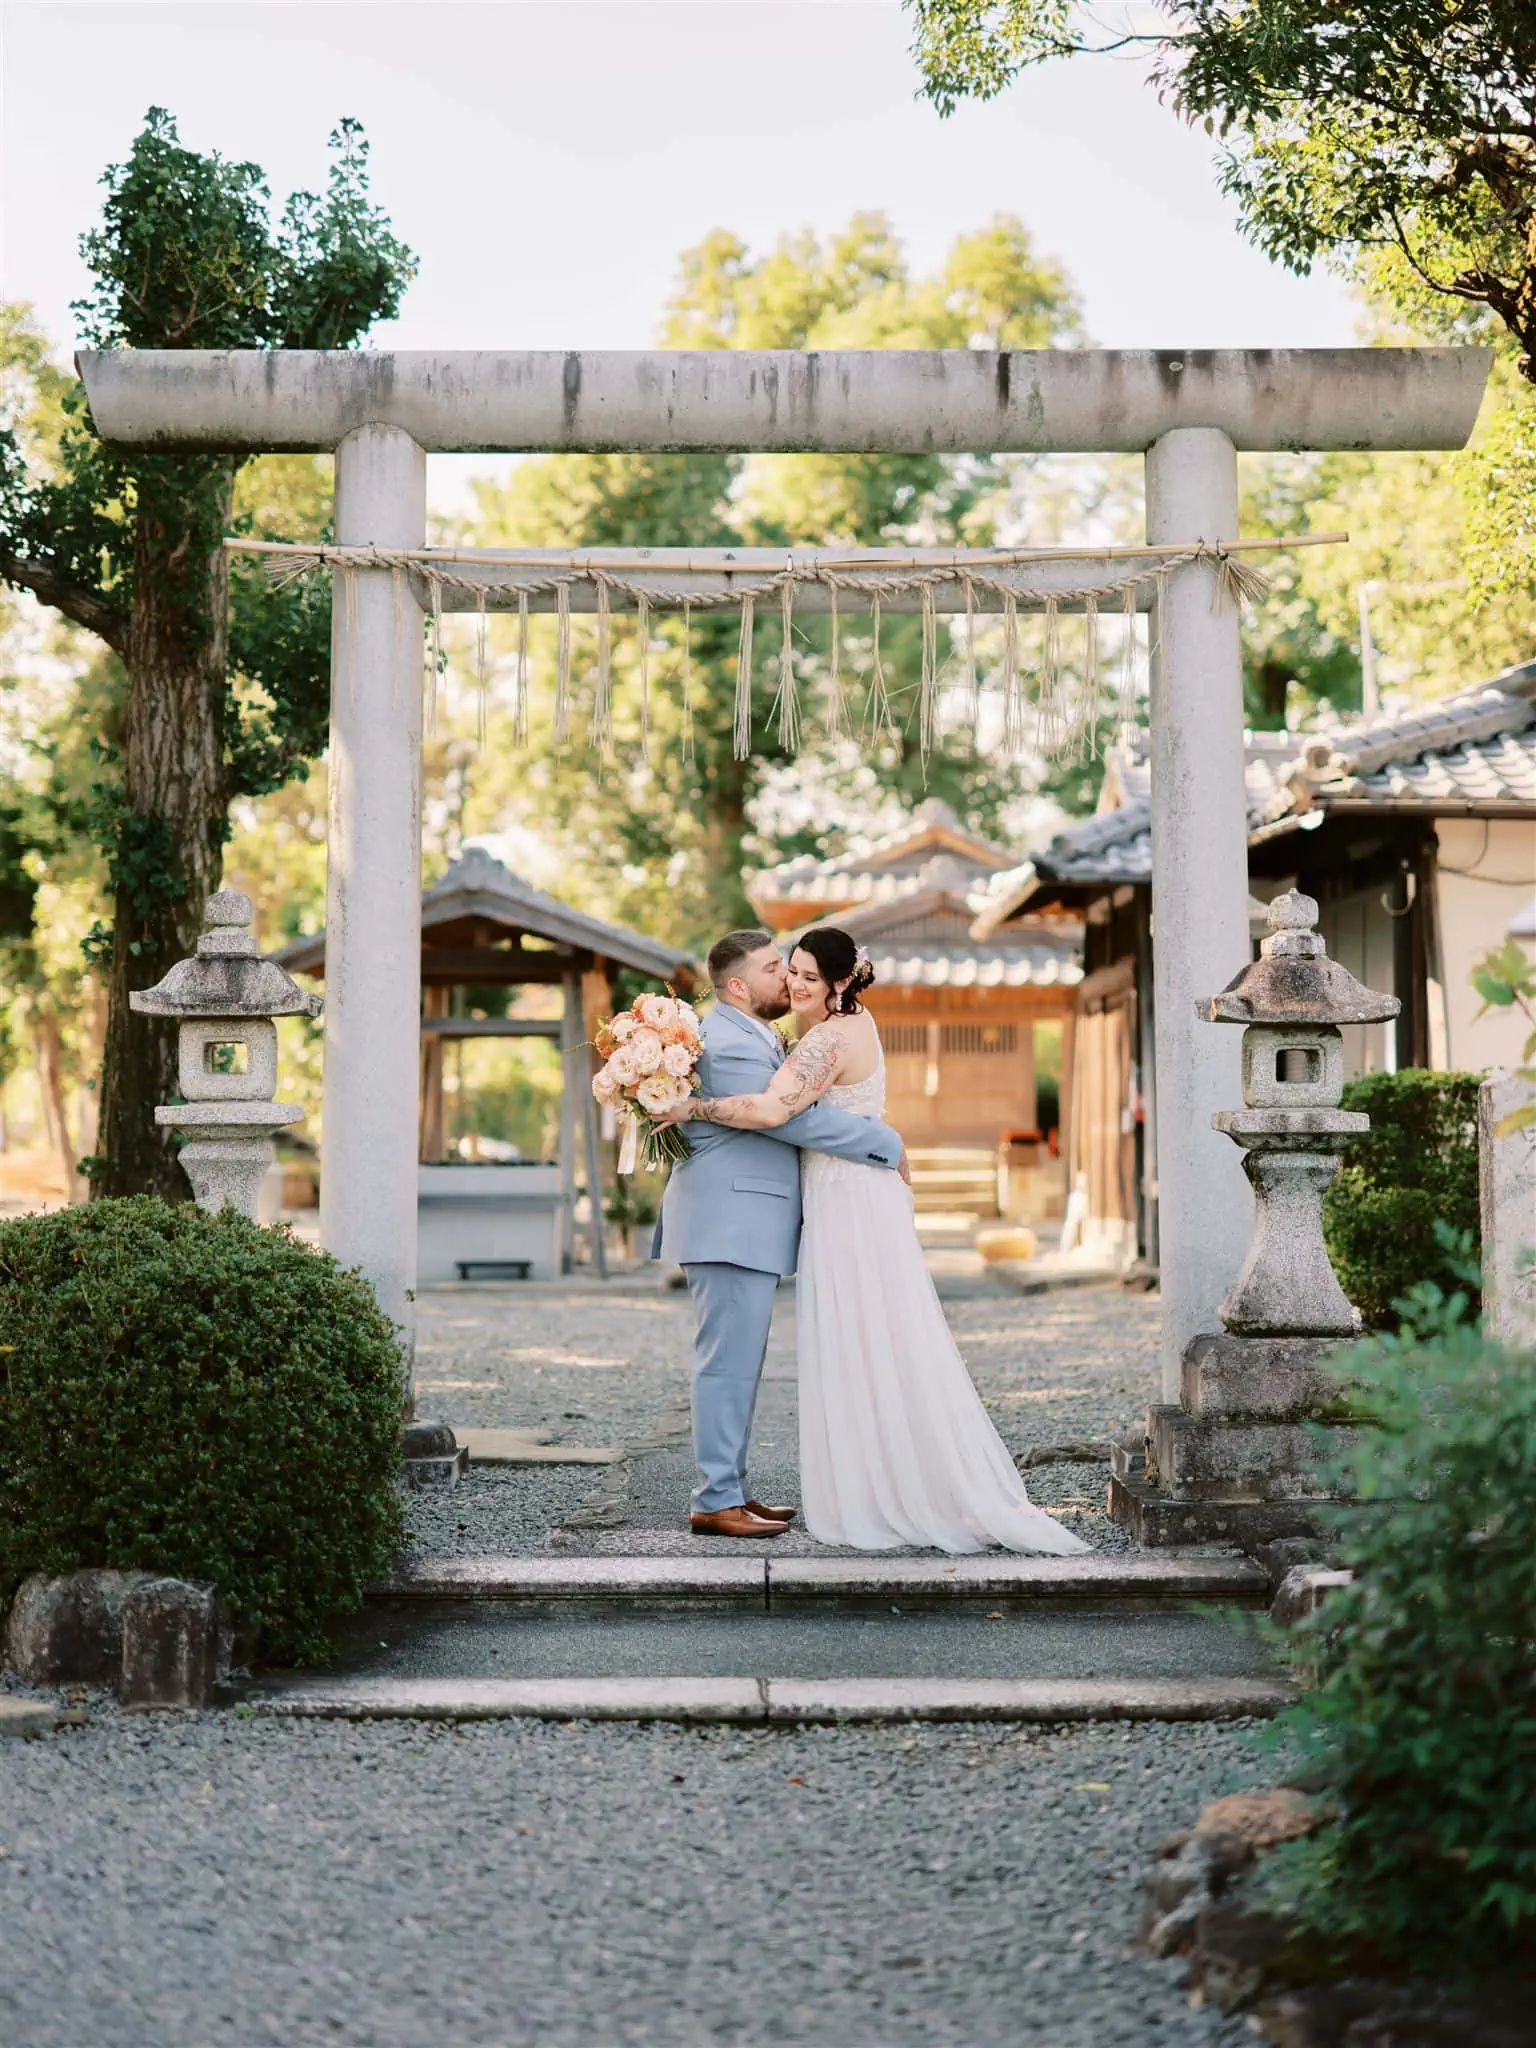 Kyoto Tokyo Japan Elopement Wedding Photographer, Planner & Videographer | A newlywed couple shares a romantic kiss in front of a Japanese torii gate during their Japan elopement.